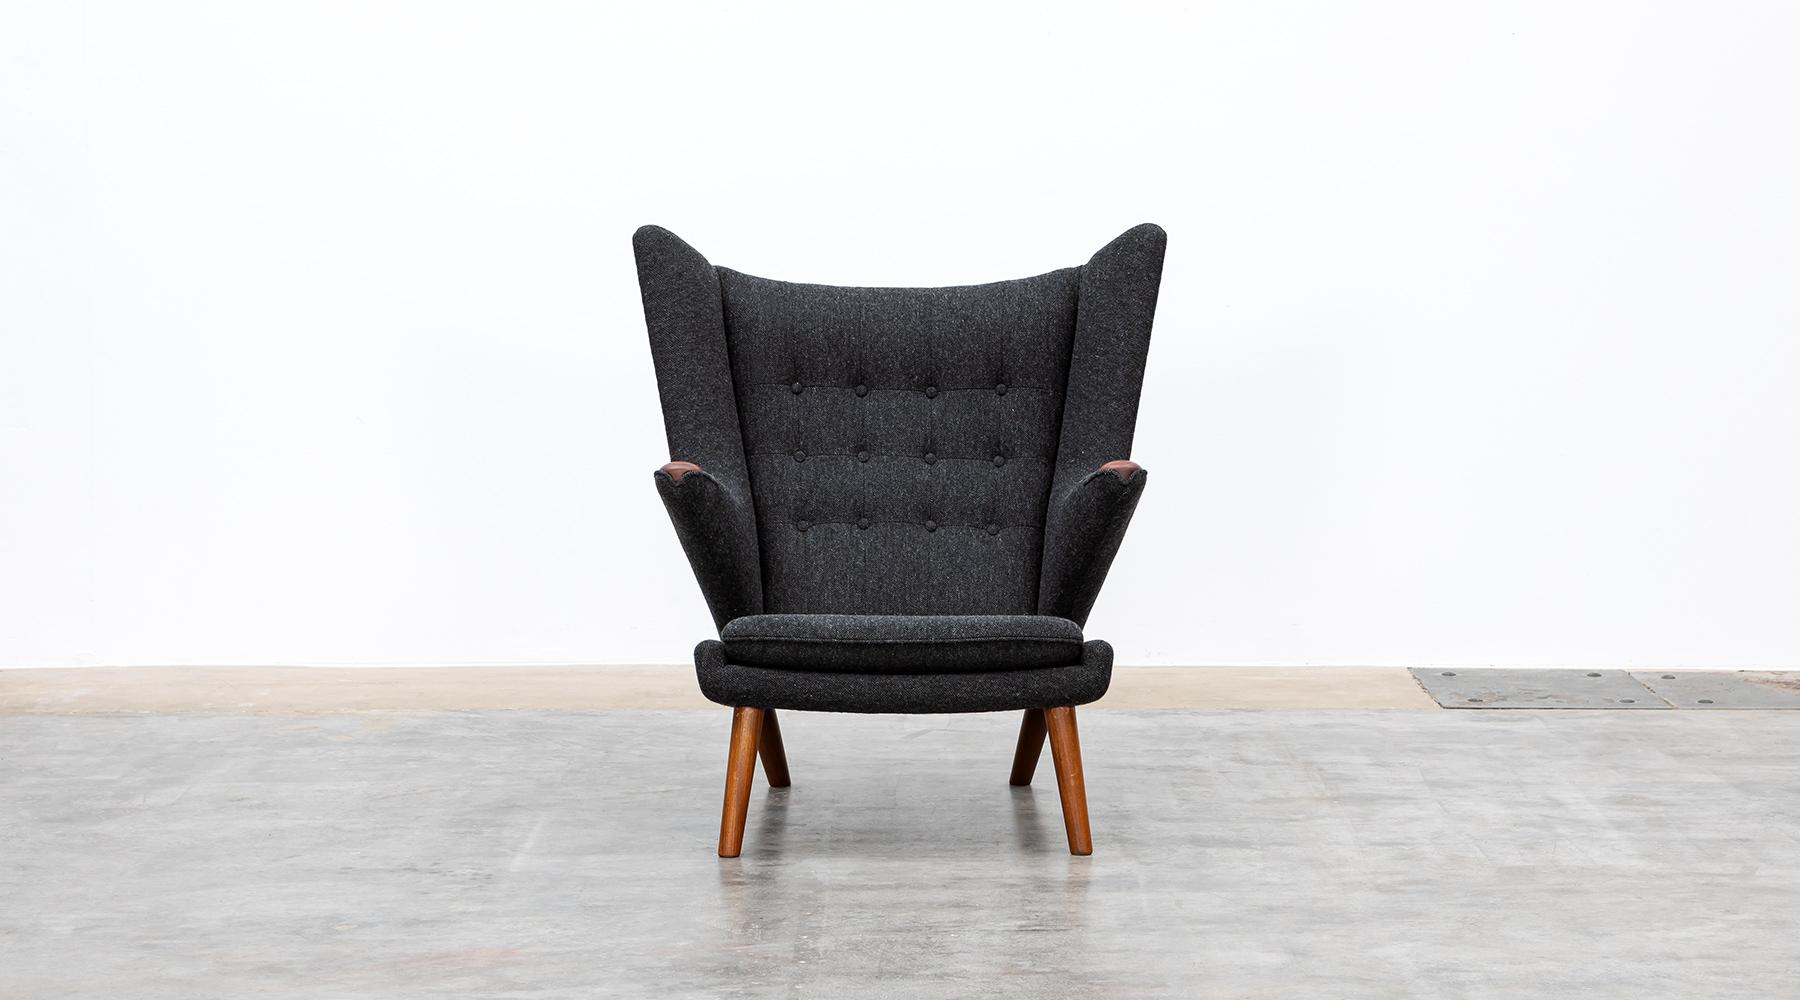 Papa Bear chair by Hans Wegner manufactured by A.P. Stolen, Denmark, 1951

Wonderful original Papa Bear chair designed by Hans Wegner. This ingenious piece comes in perfect condition, recently new upholstered with its high-quality woolen fabric in